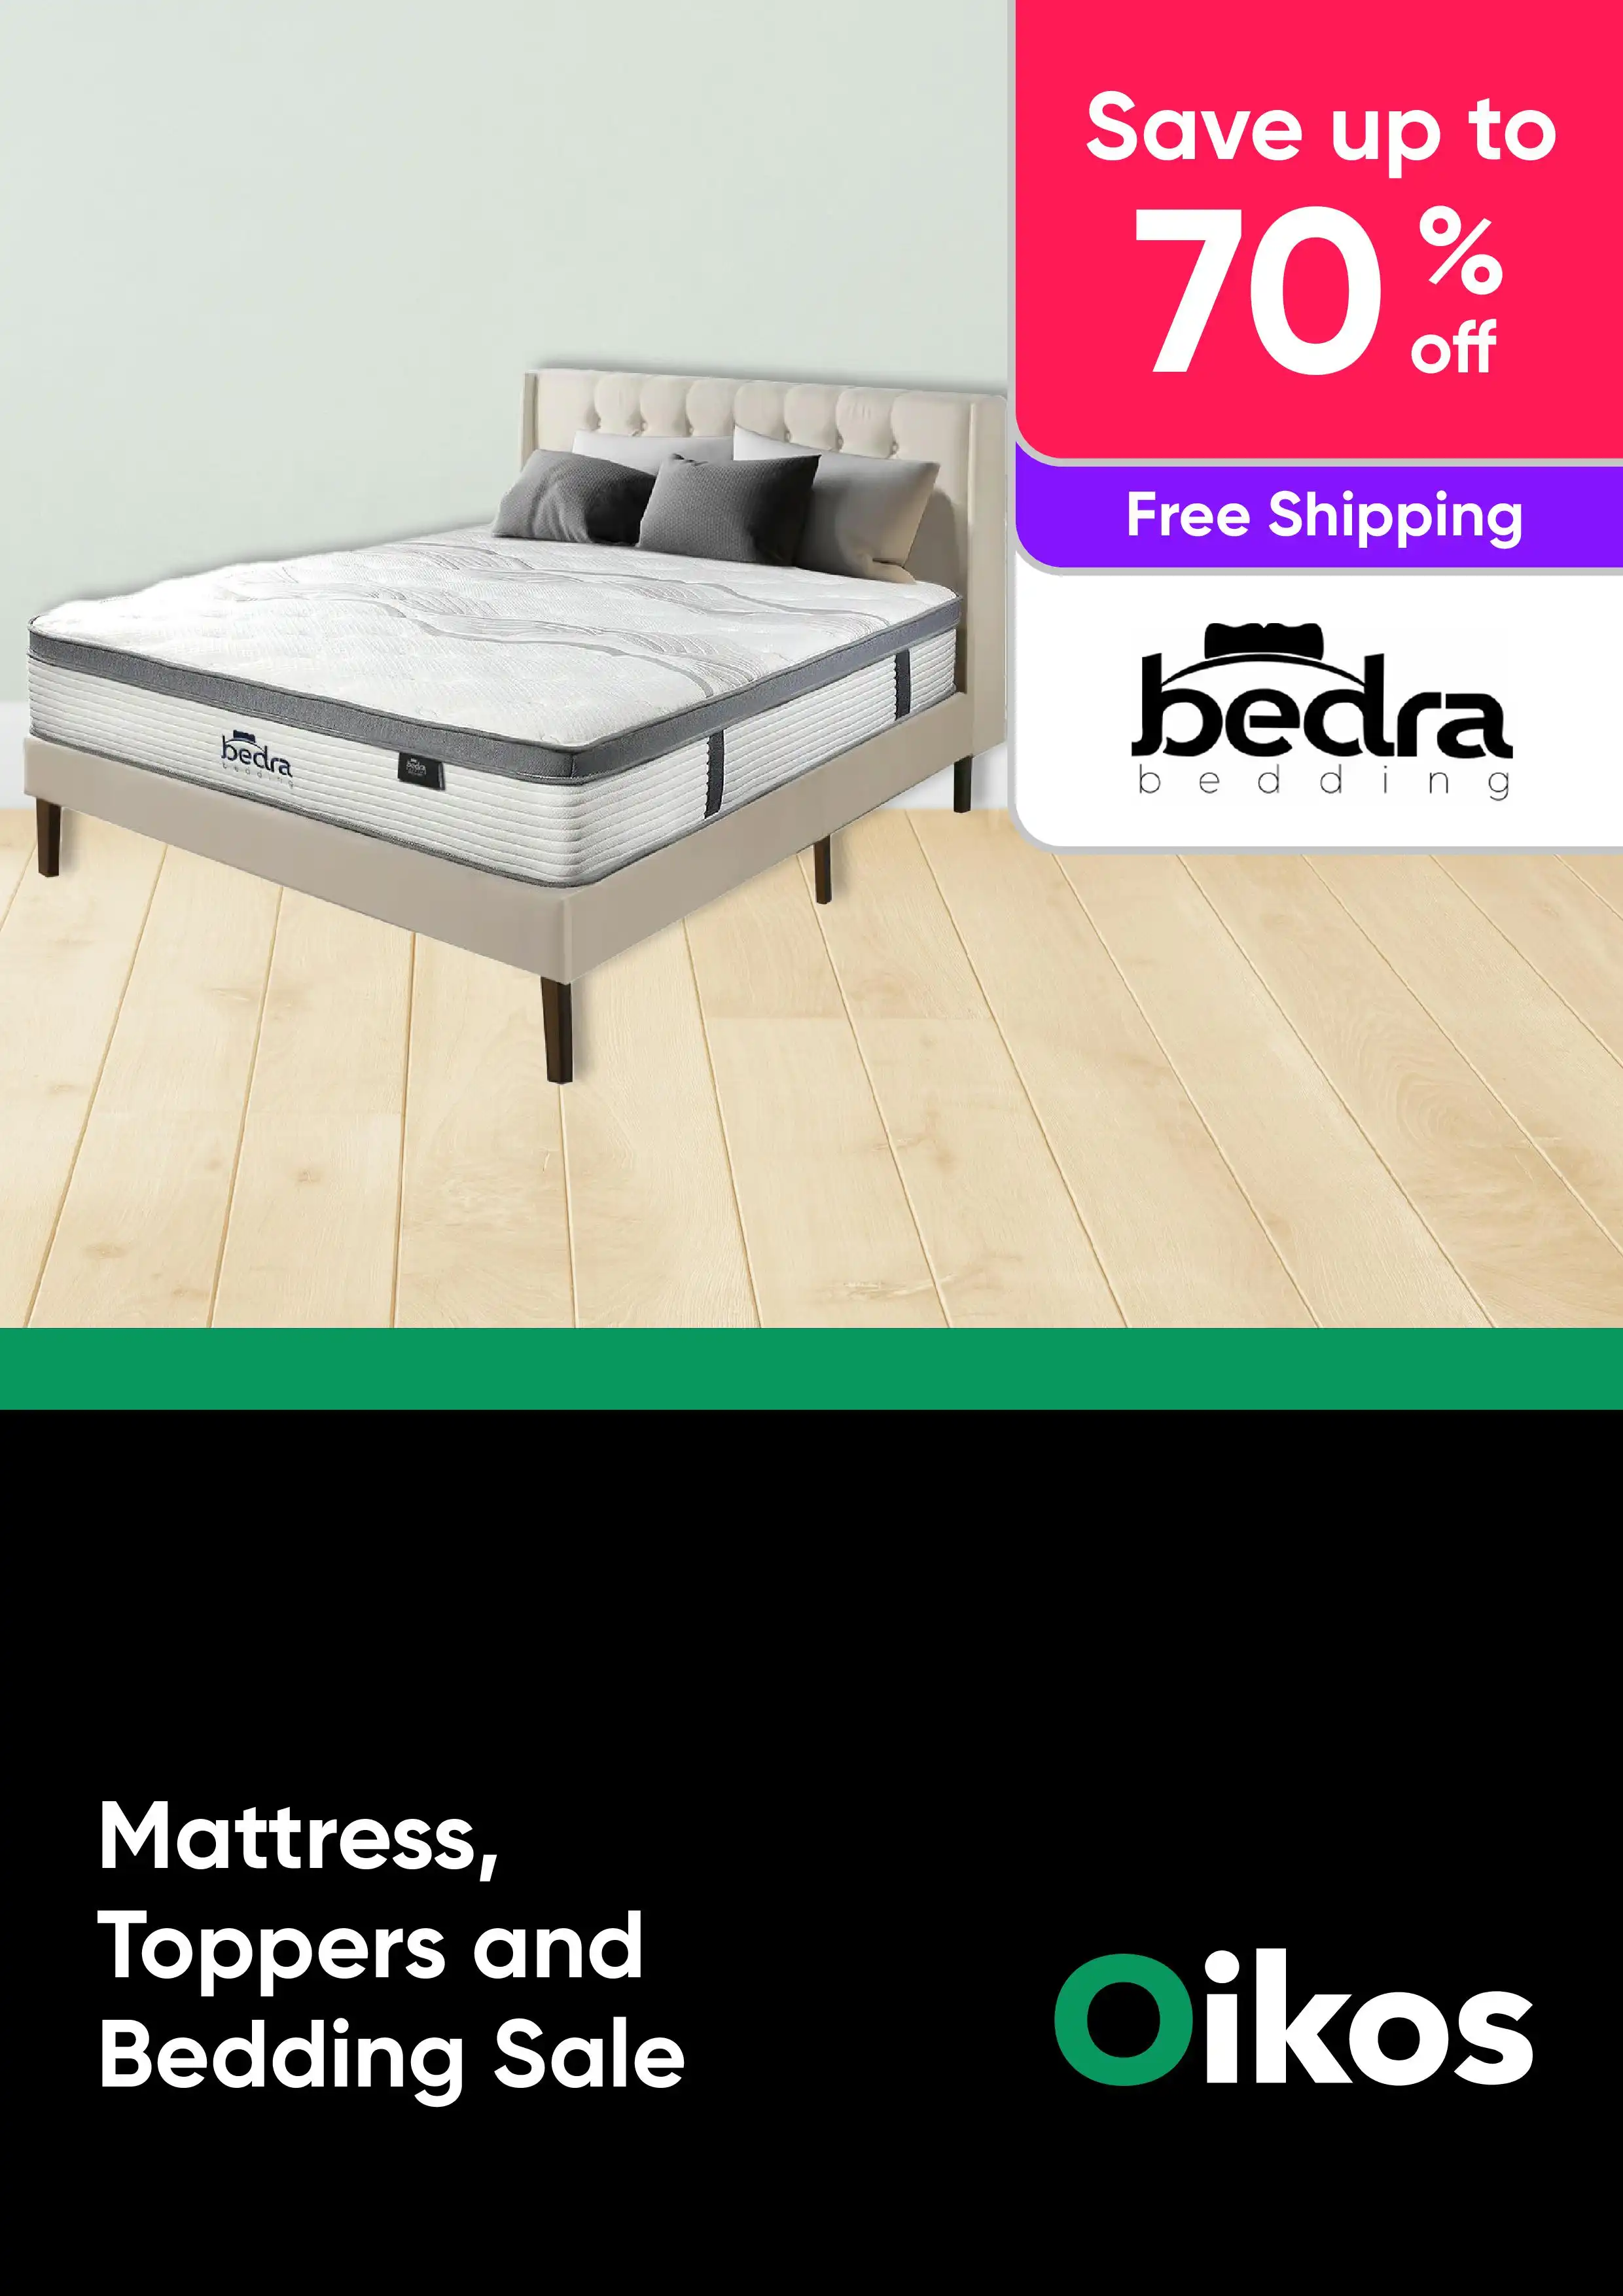 Mattress, Toppers and Bedding Sale - Bedra Bedding - Up to 70% Off